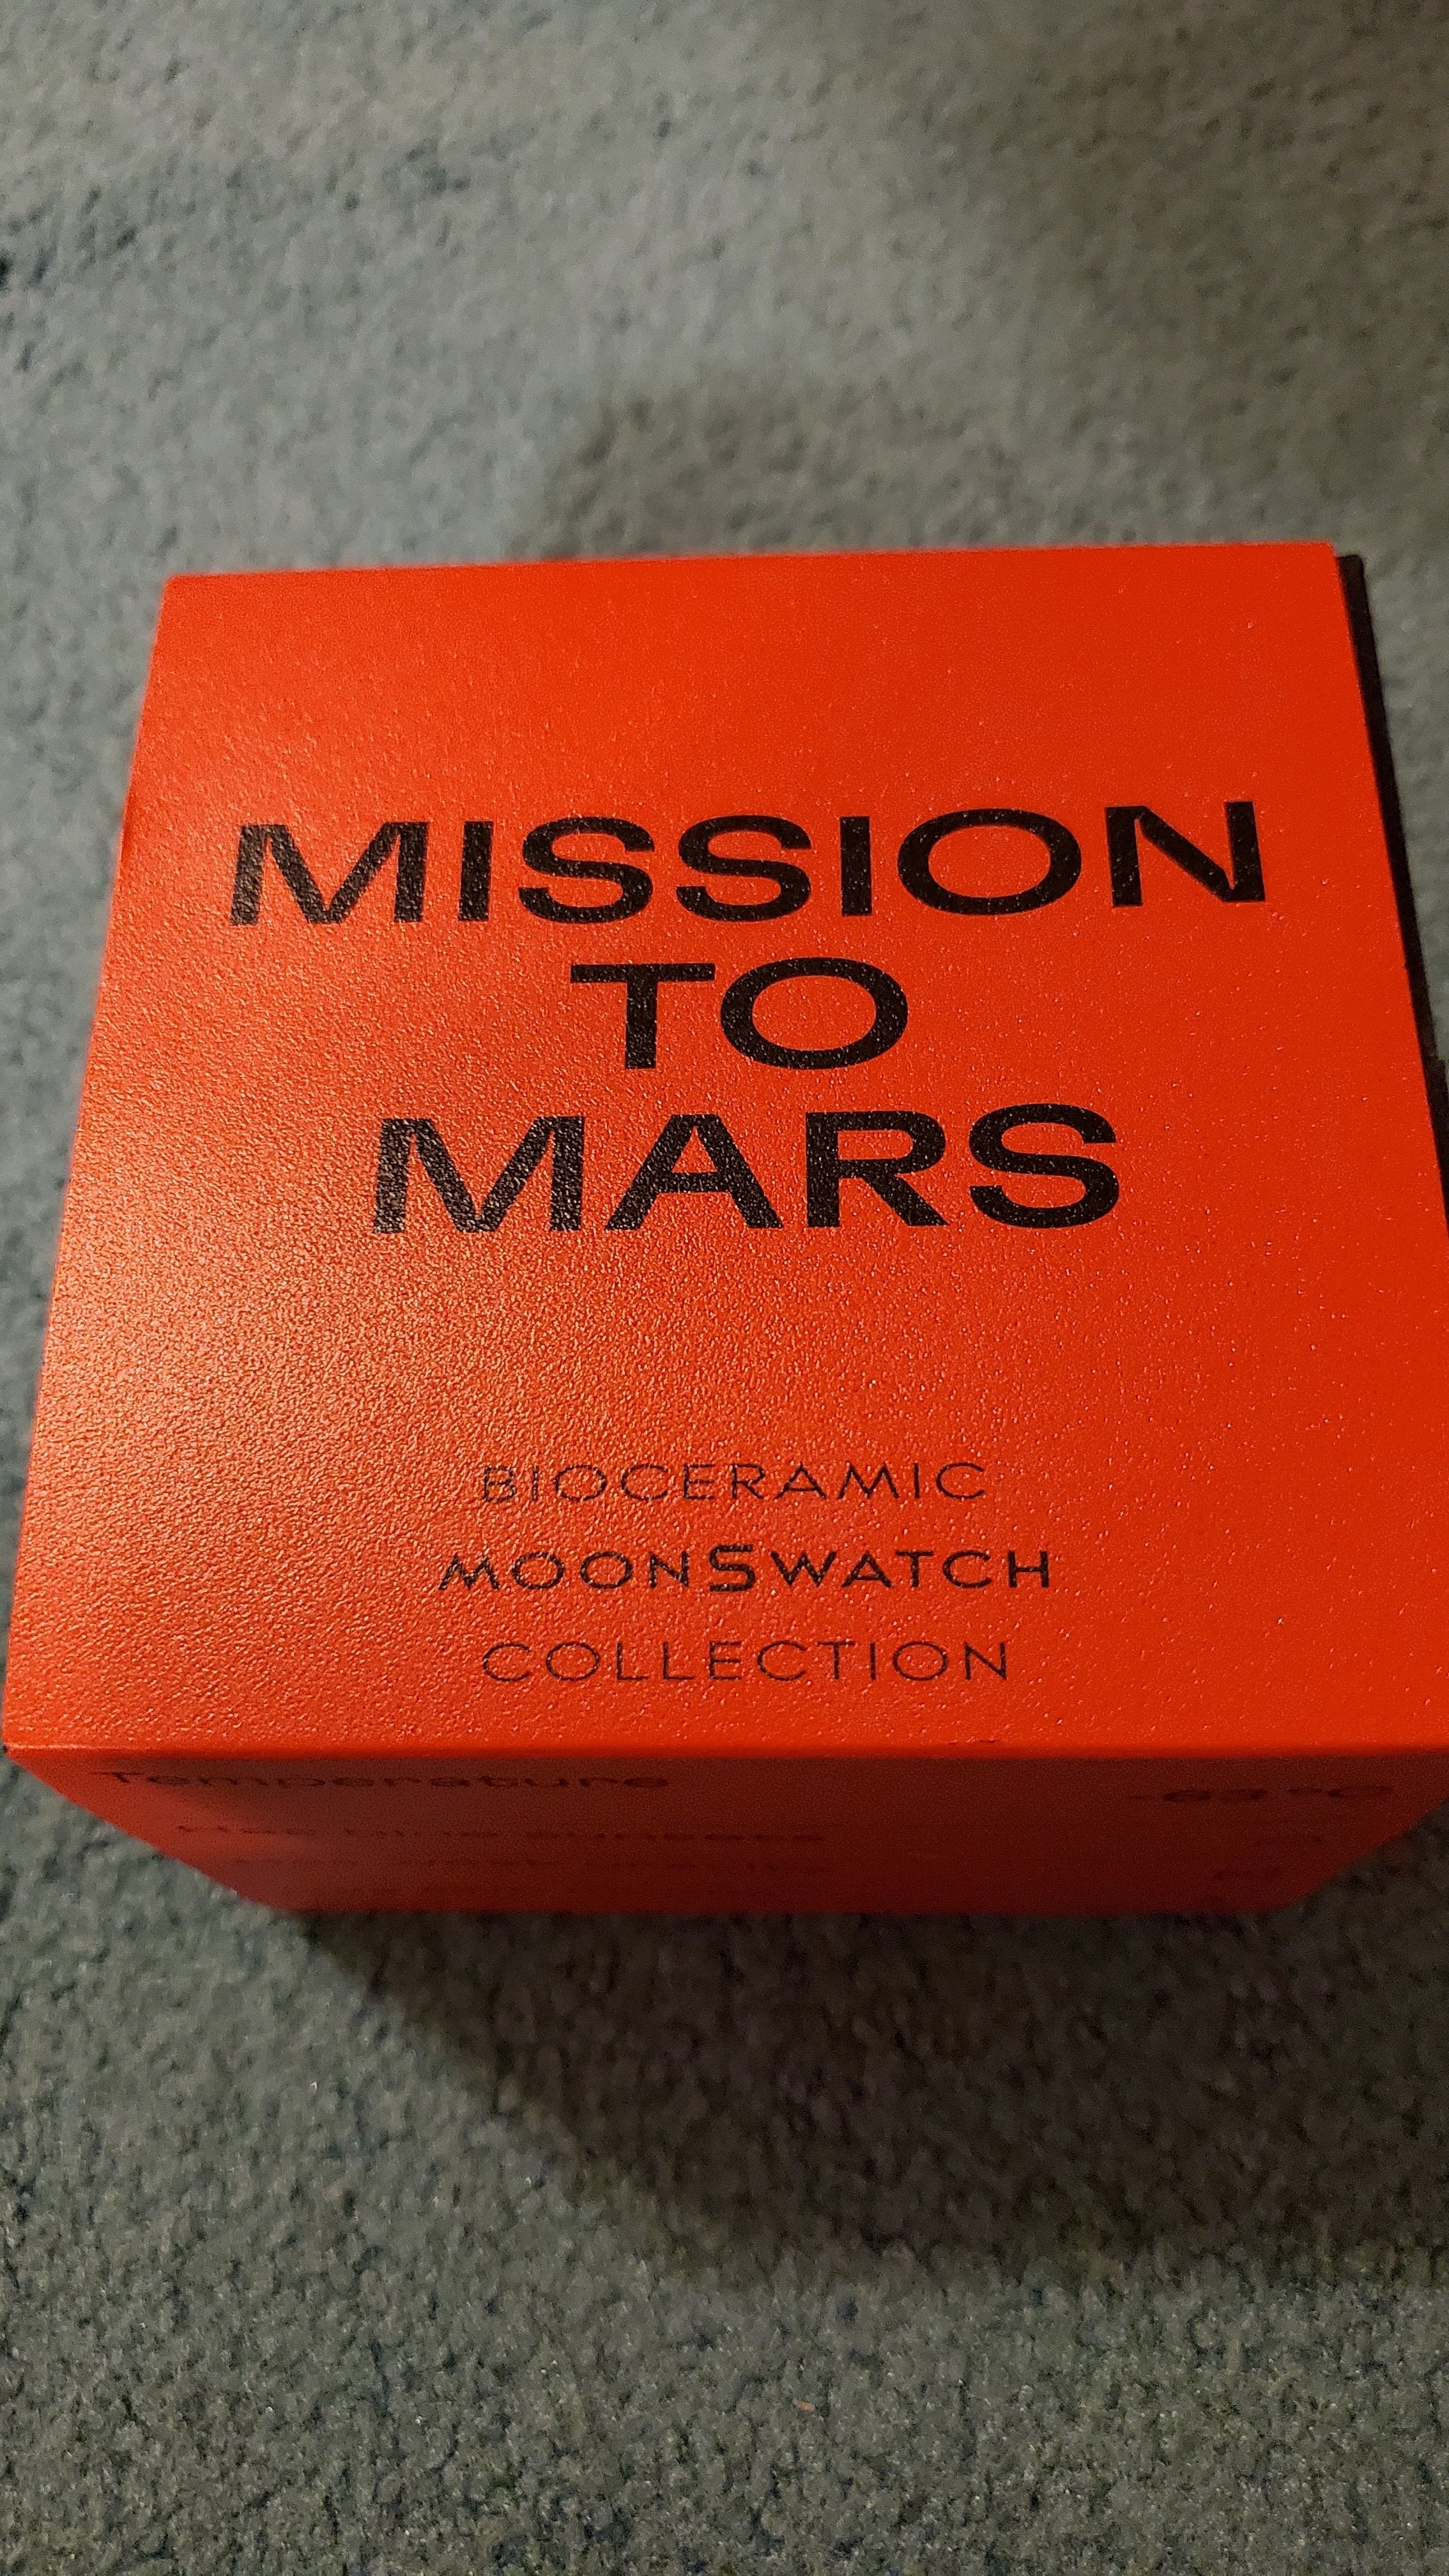 This just in! Omega x Swatch Mission to Mars Moonswatch